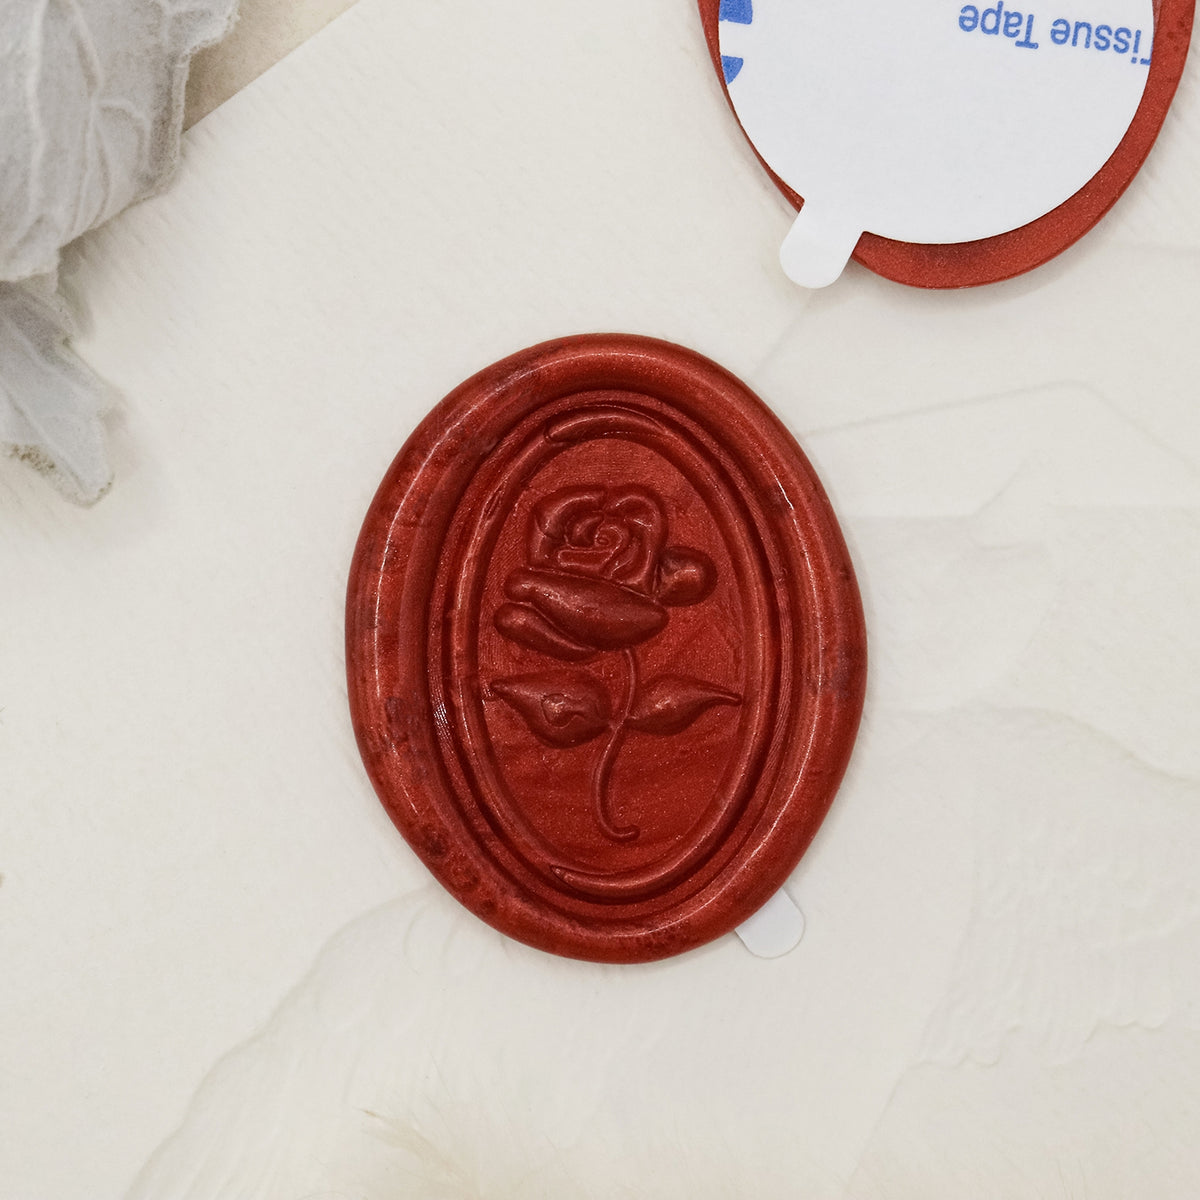 Ready Made Wax Seals Stickers - Rose Self-Adhesive Wax Seal Stickers - Style 06